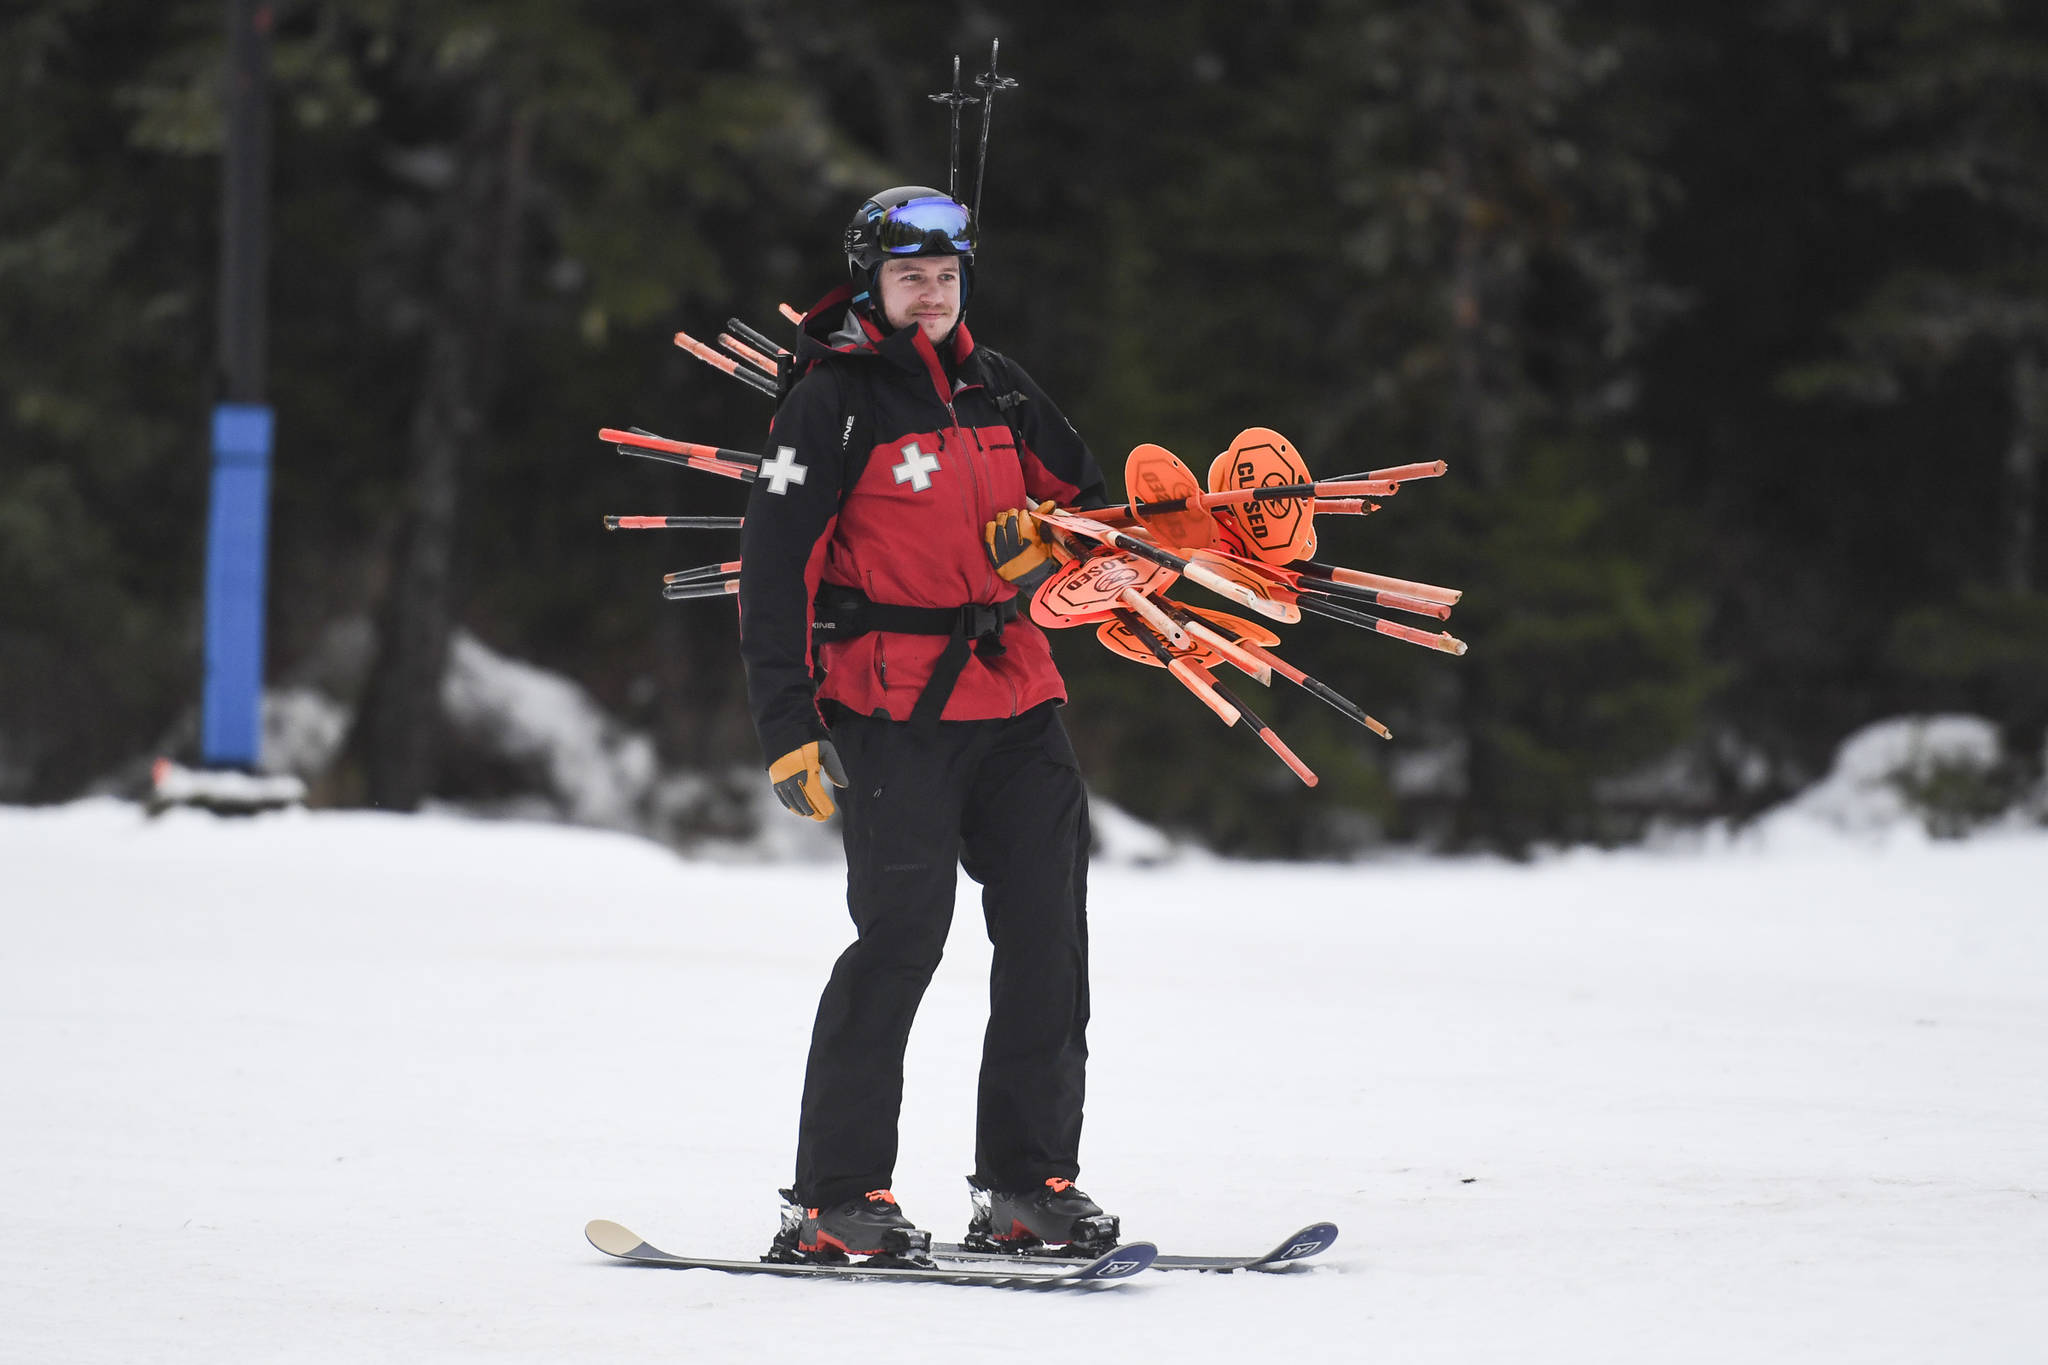 Eaglecrest Ski Patrol keeps busy with or without much snow